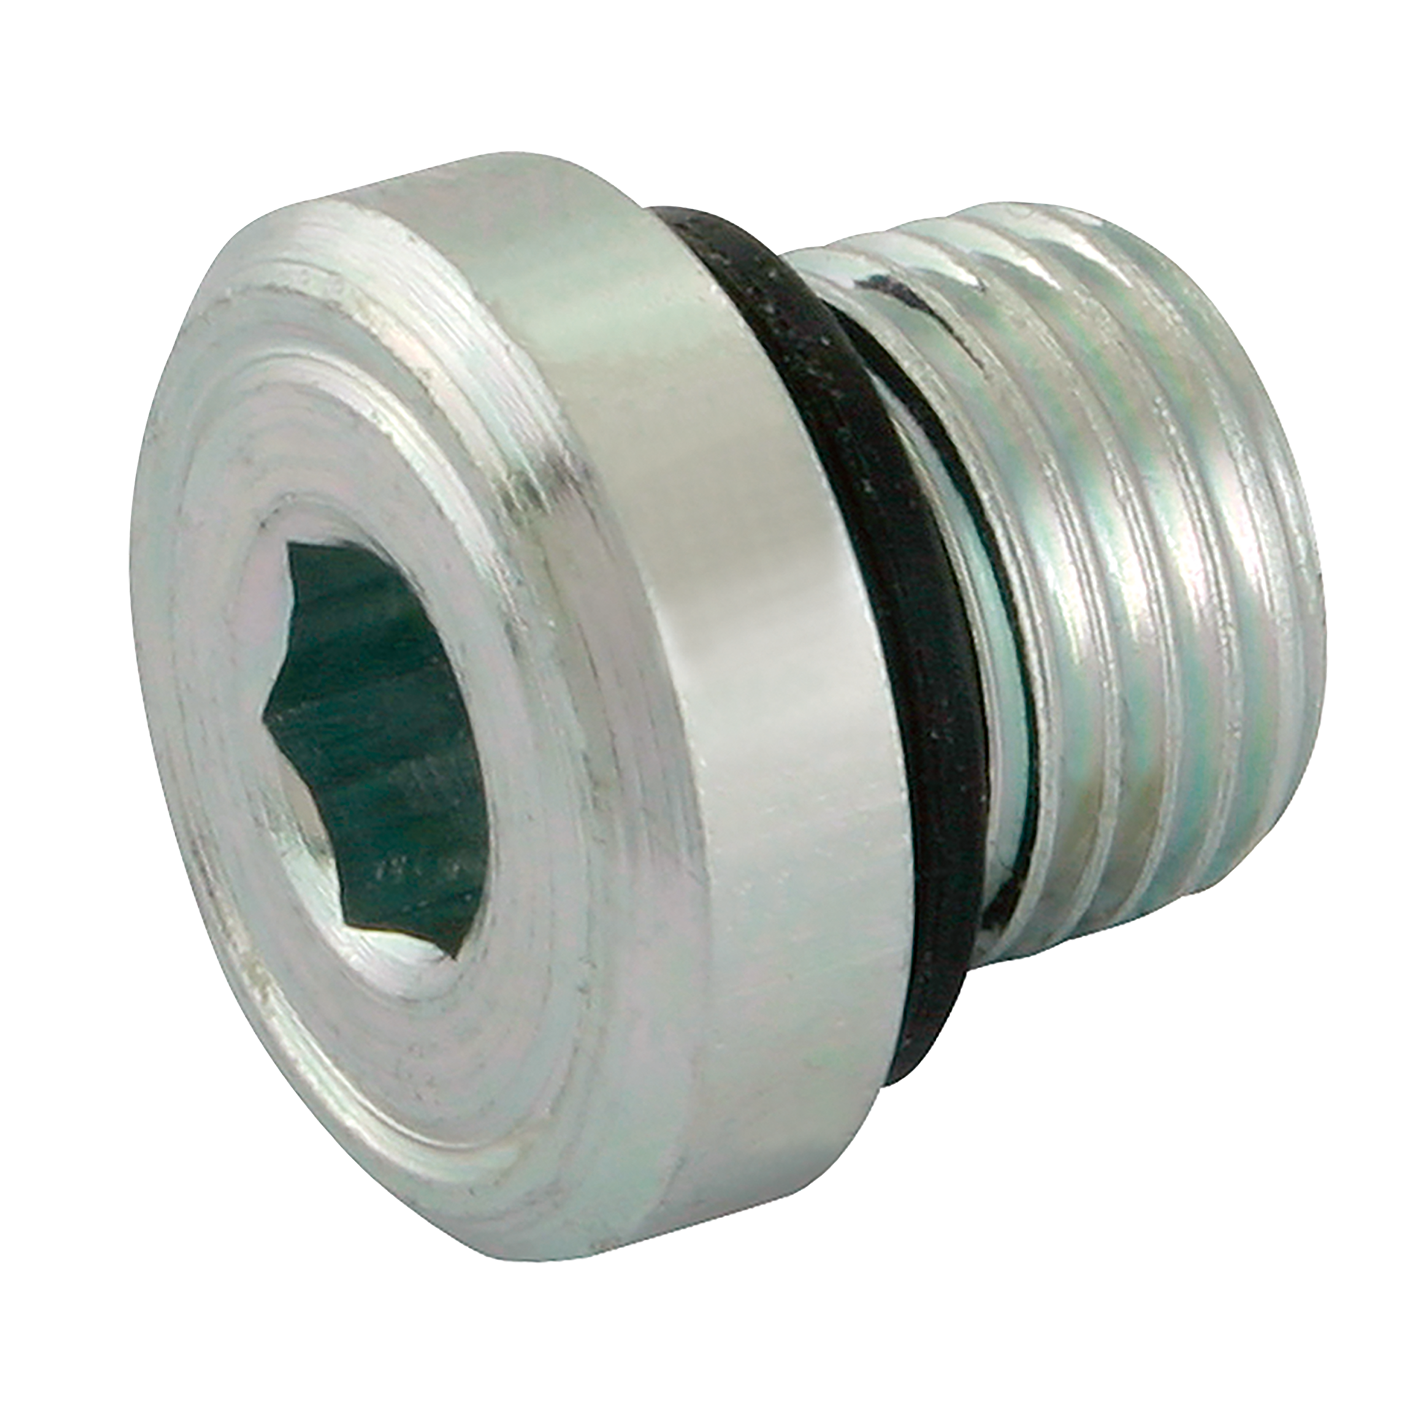 1.1/4"BSPP MALE BLANKING PLUG andSEAL NBR